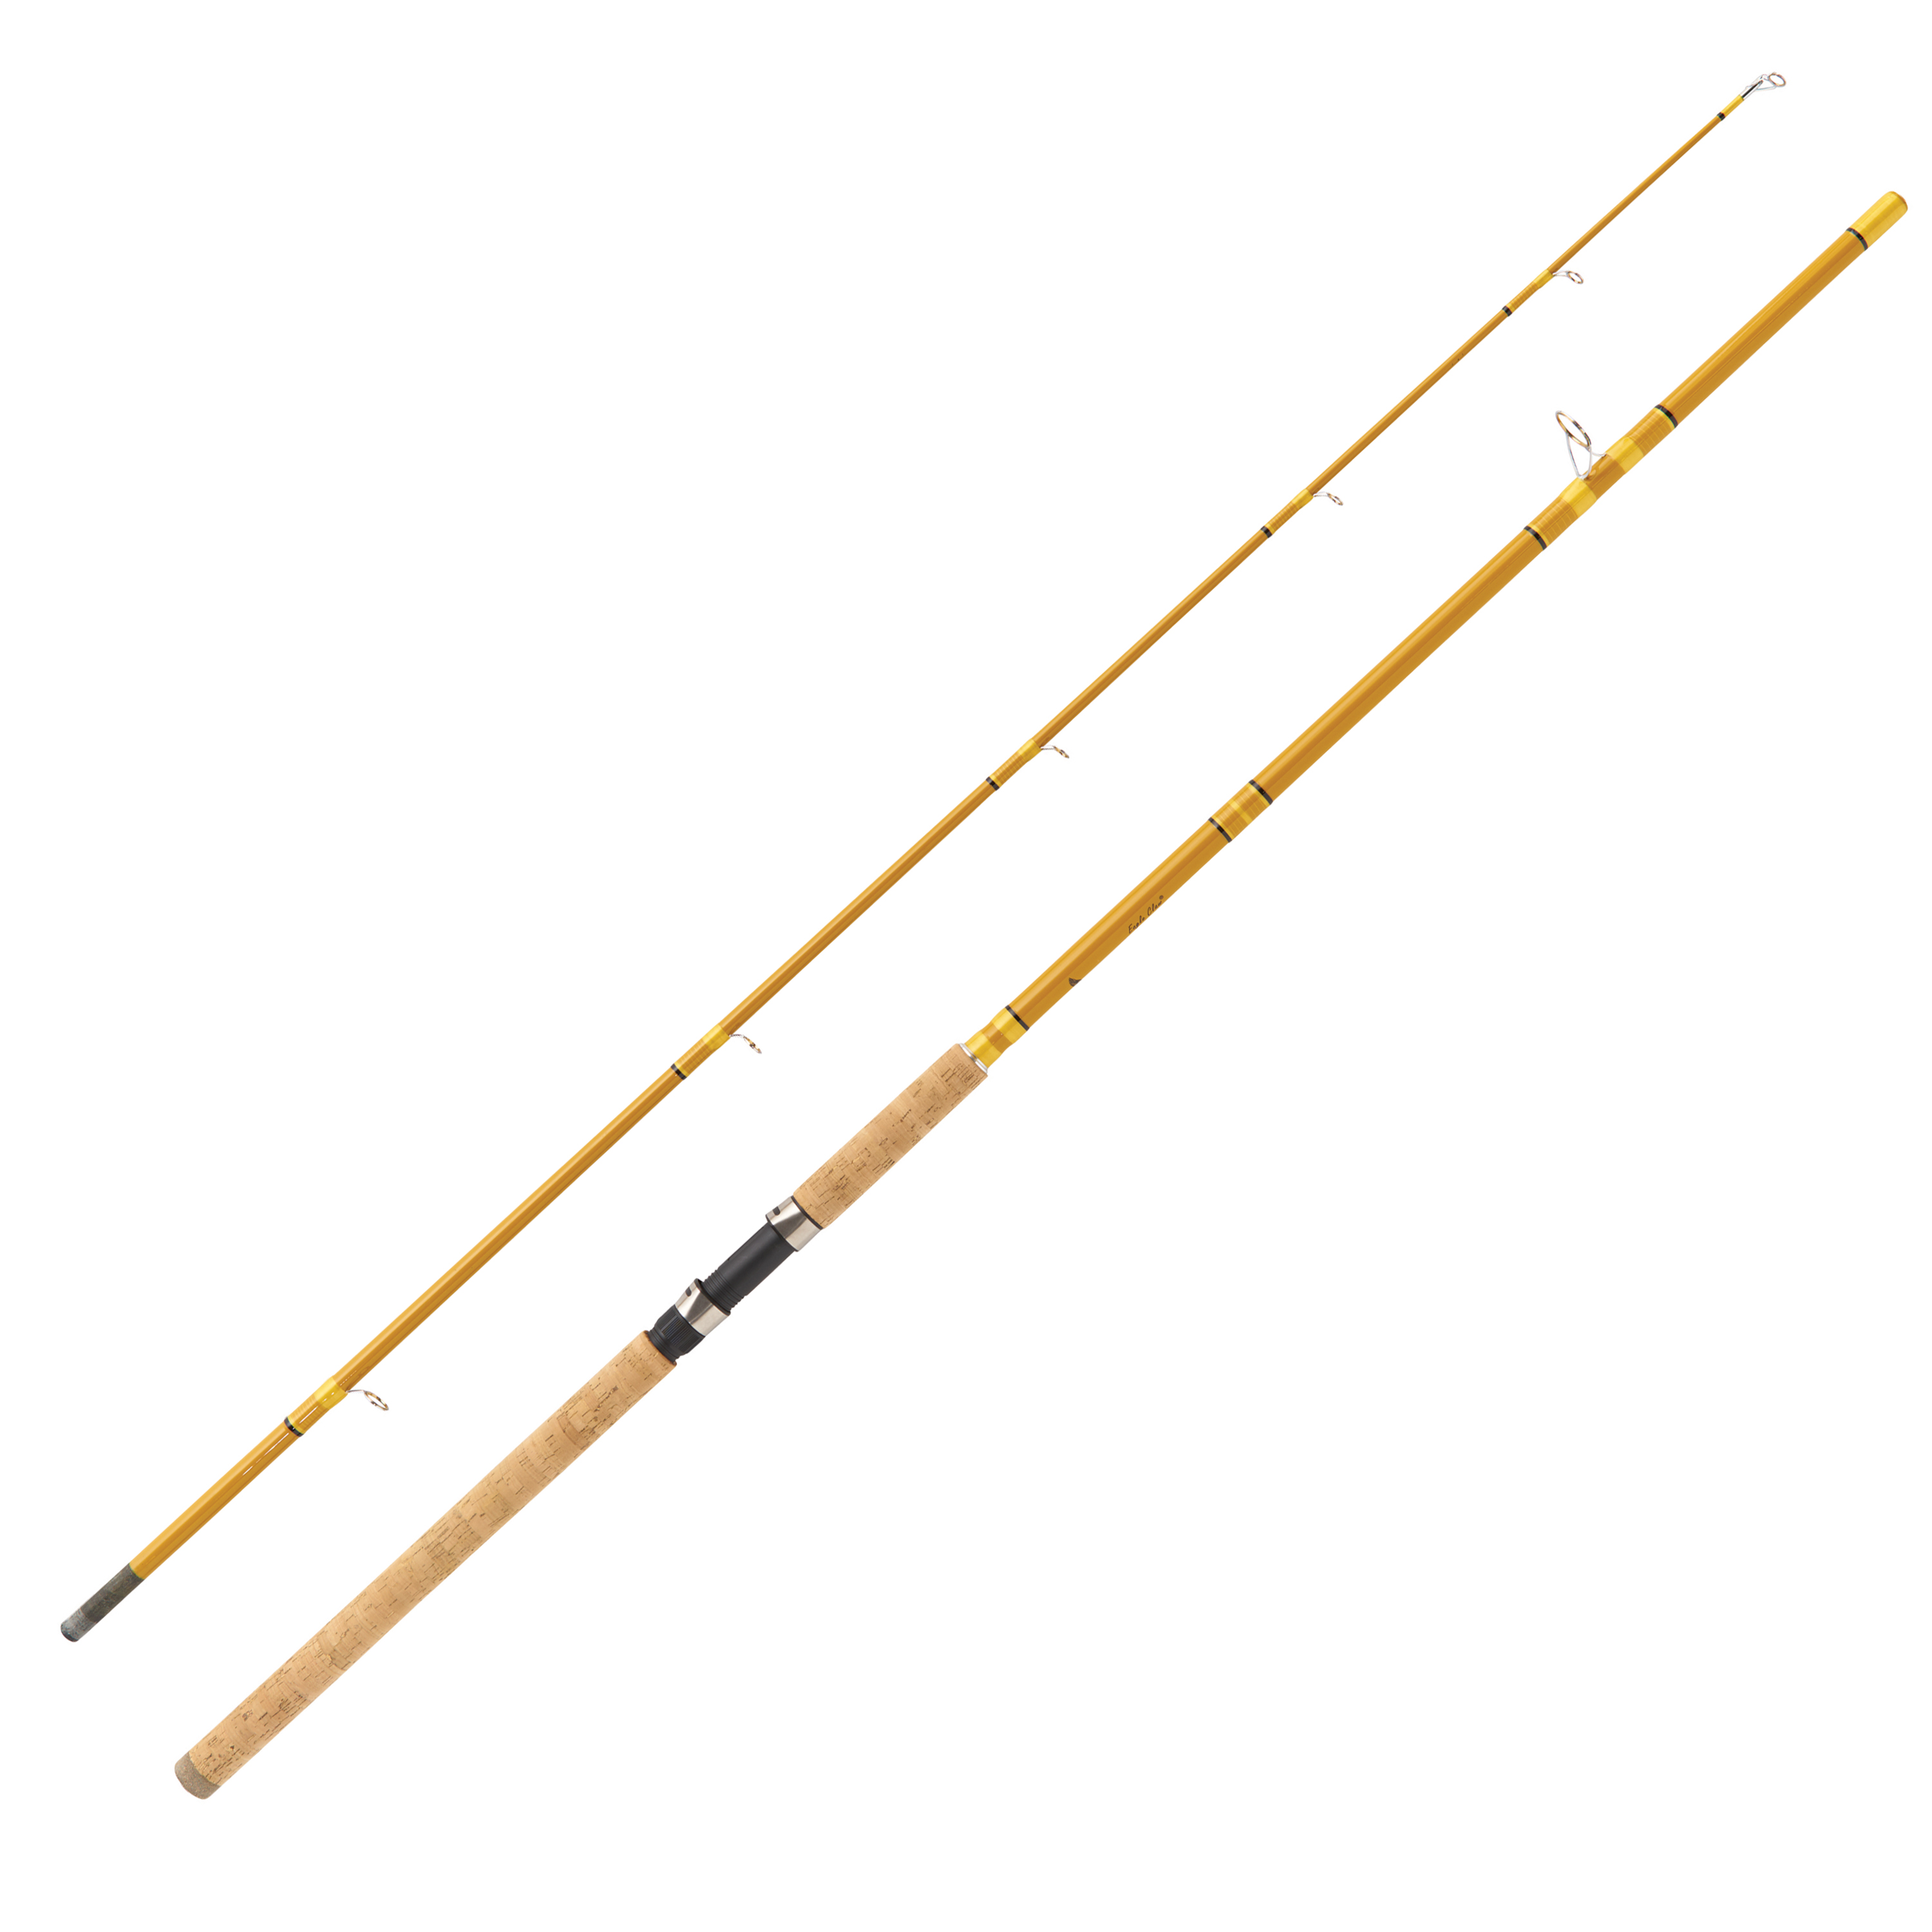 https://op1.0ps.us/original/opplanet-eagle-claw-crafted-glass-spinning-rod-10-2-pc-h-cg10hs2